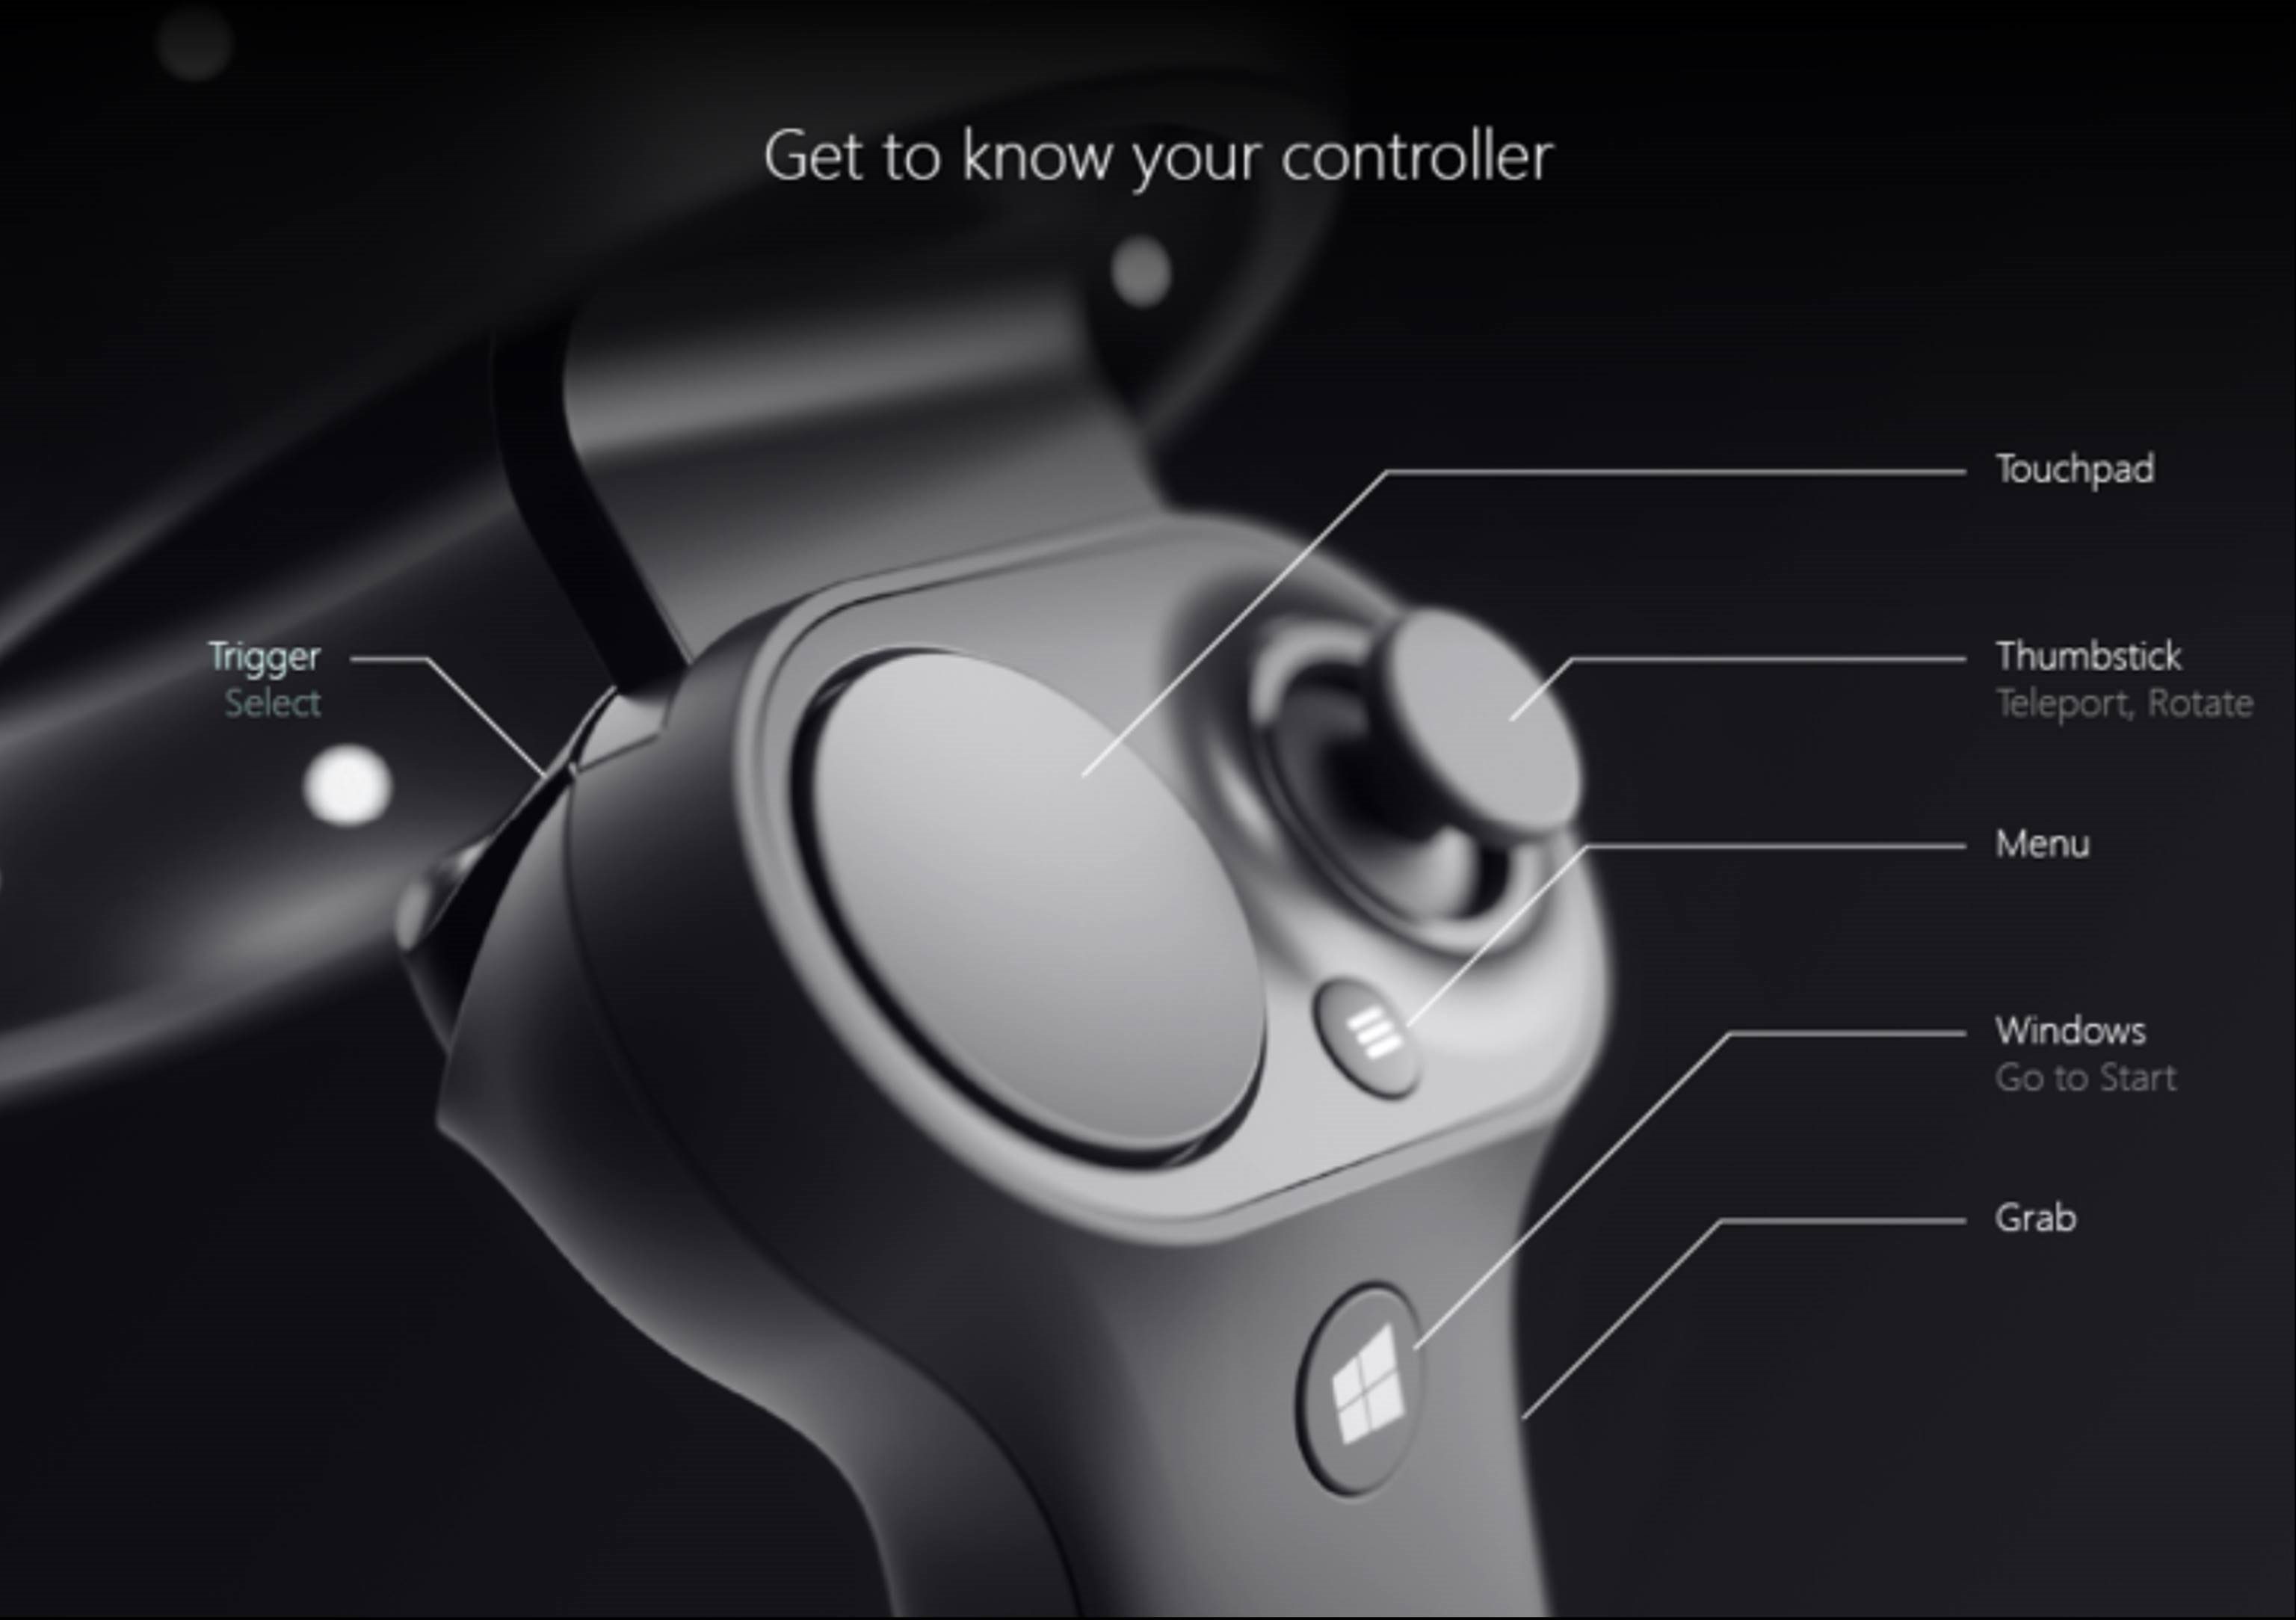 Get to know your controller